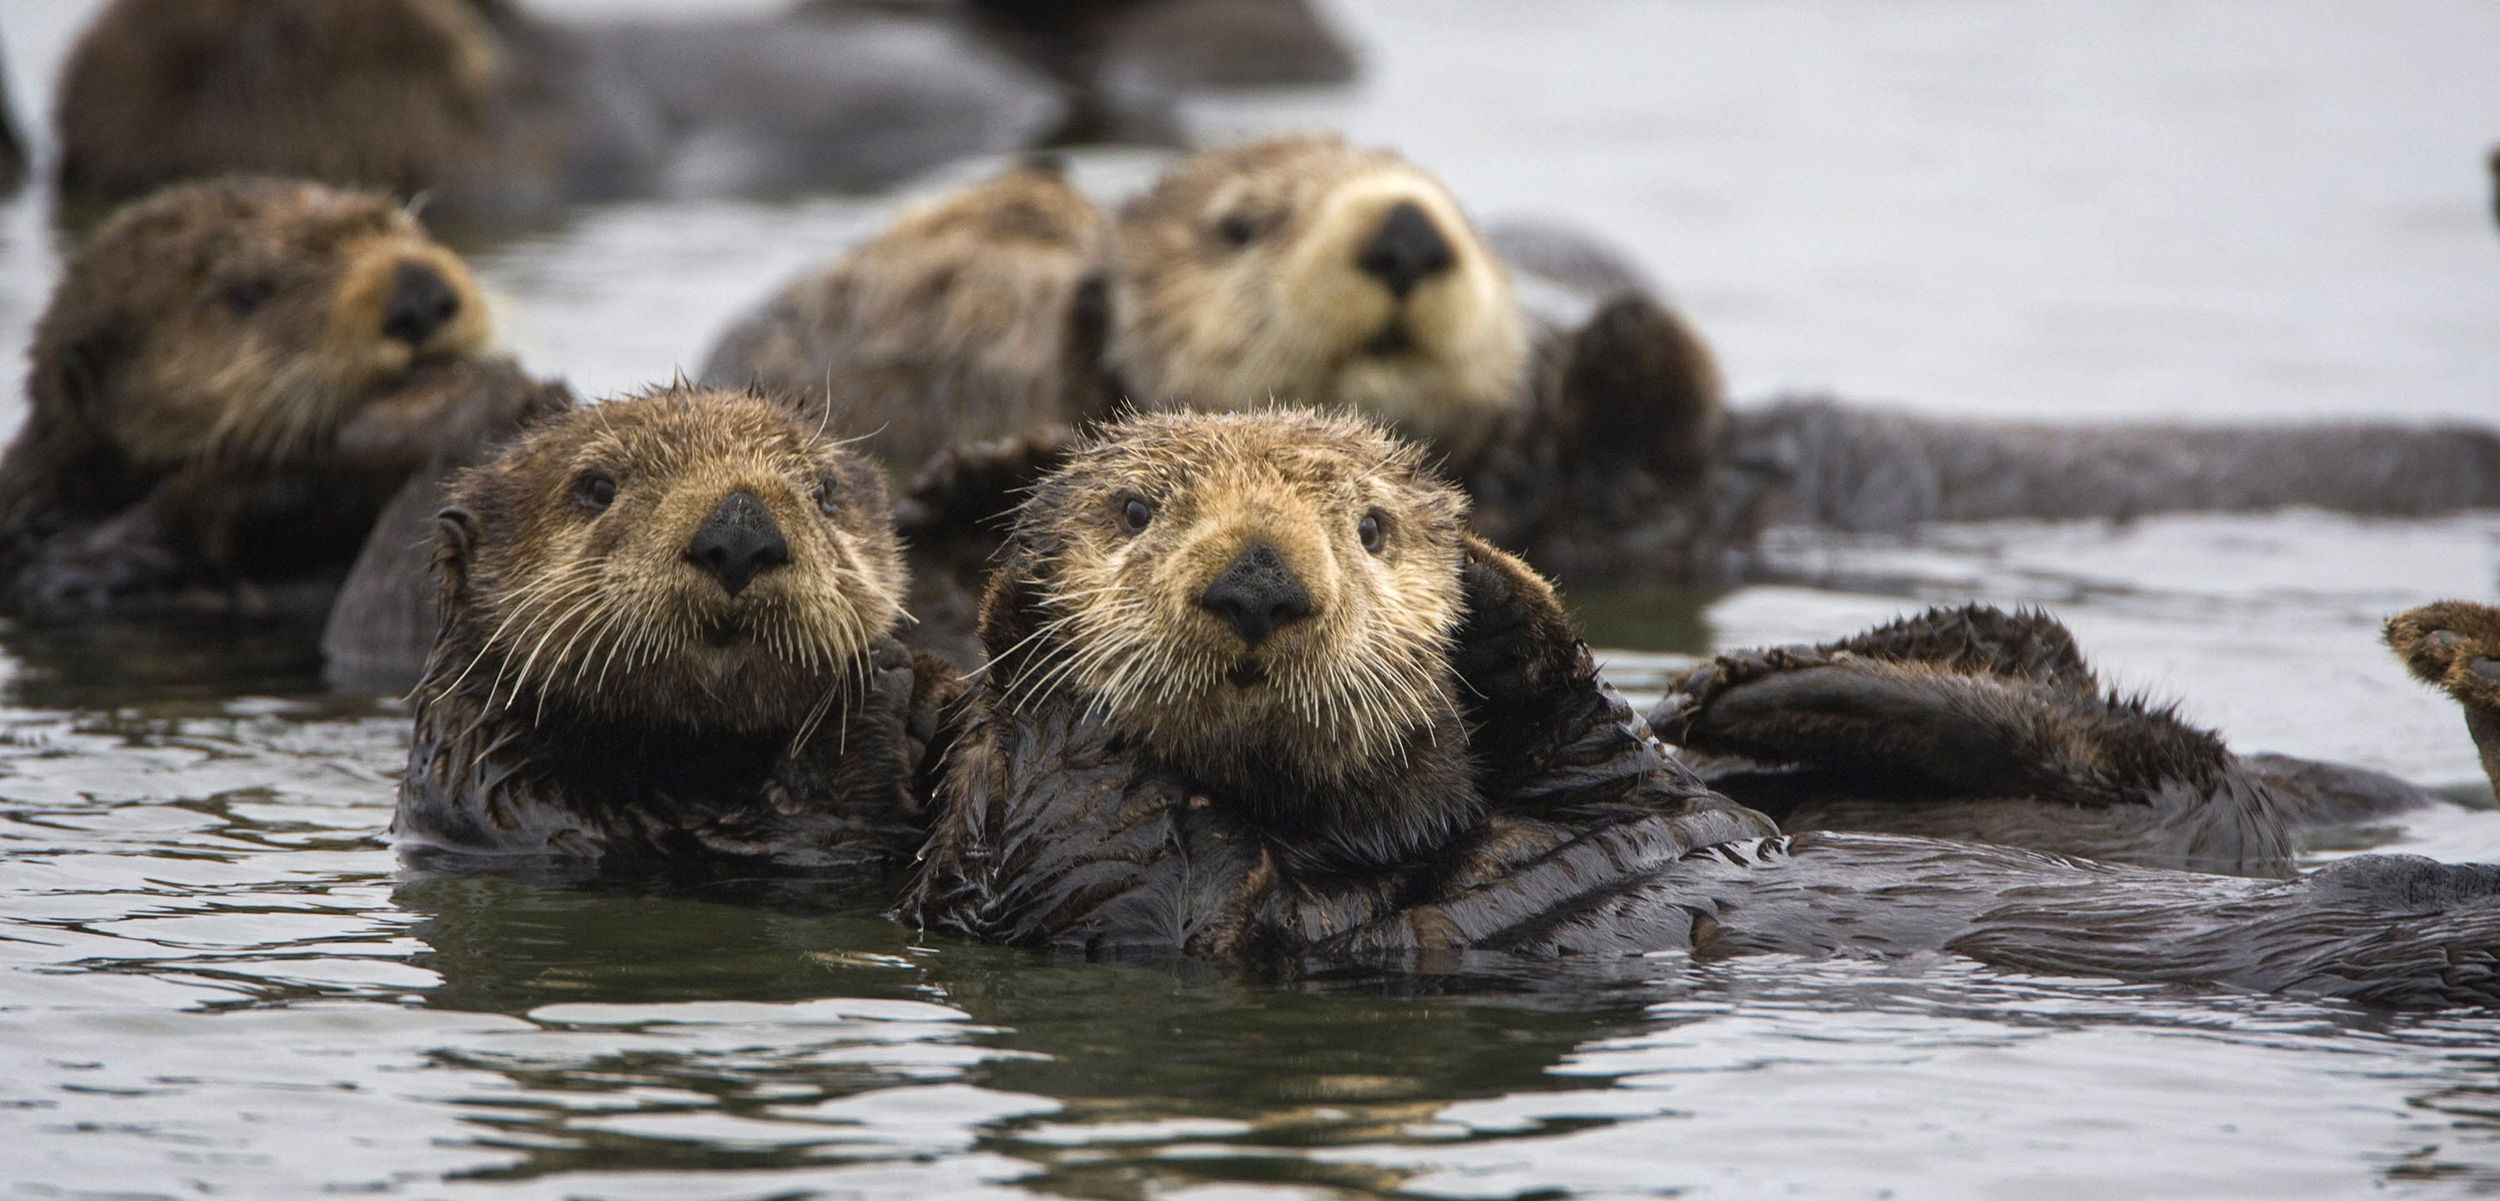 Otters: The Canaries of the Sea